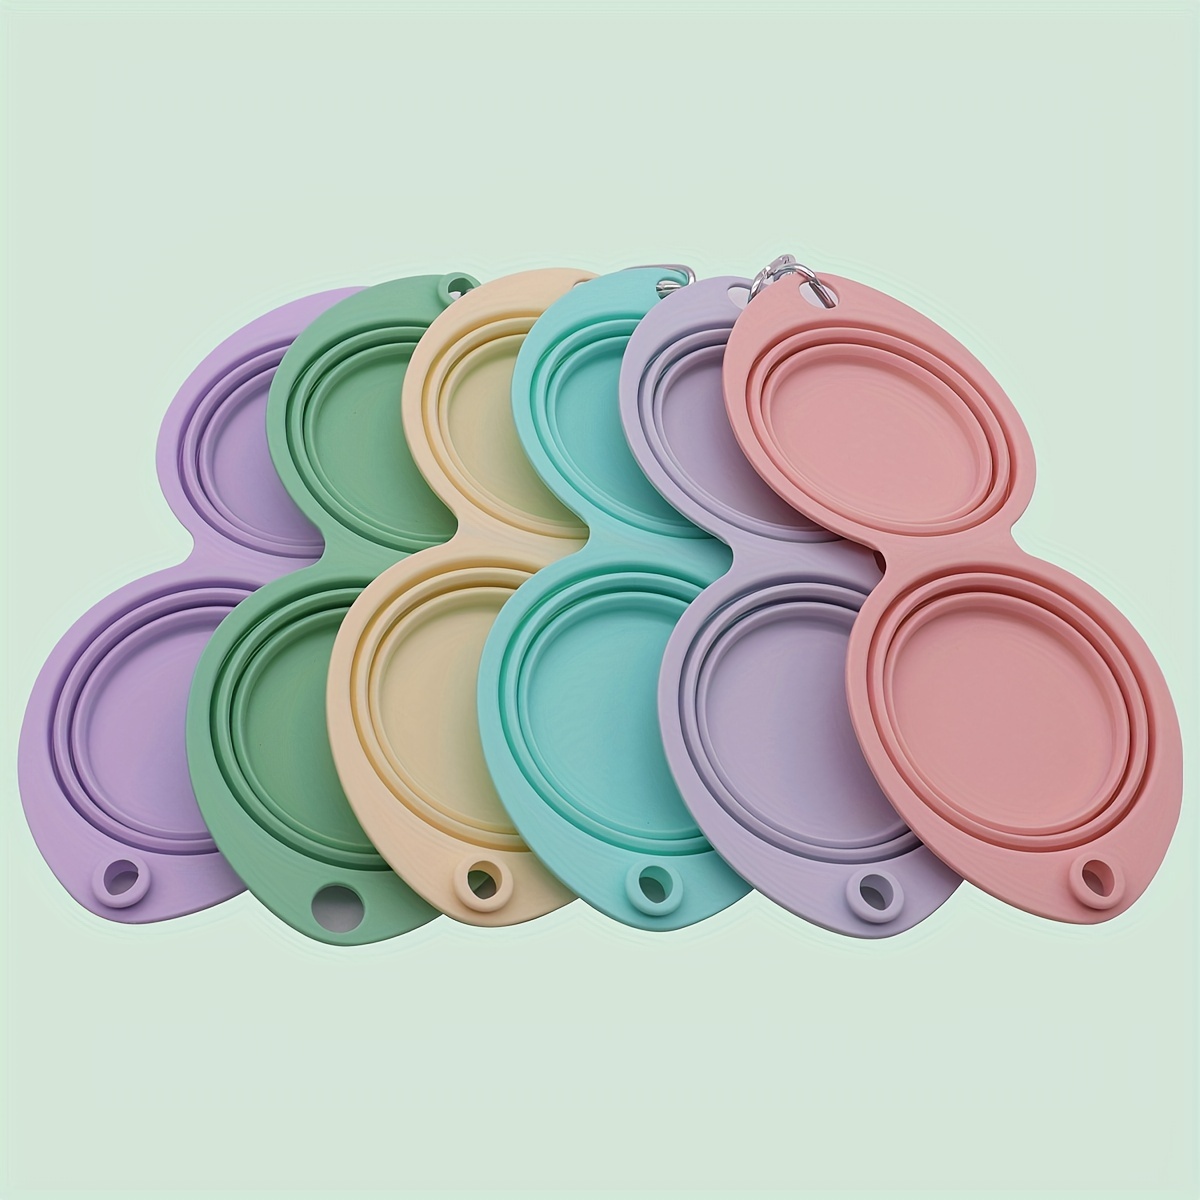 

Travel-ready Portable Outdoor Pet Bowls - Collapsible Silicone Double Bowls For Dogs & Cats!